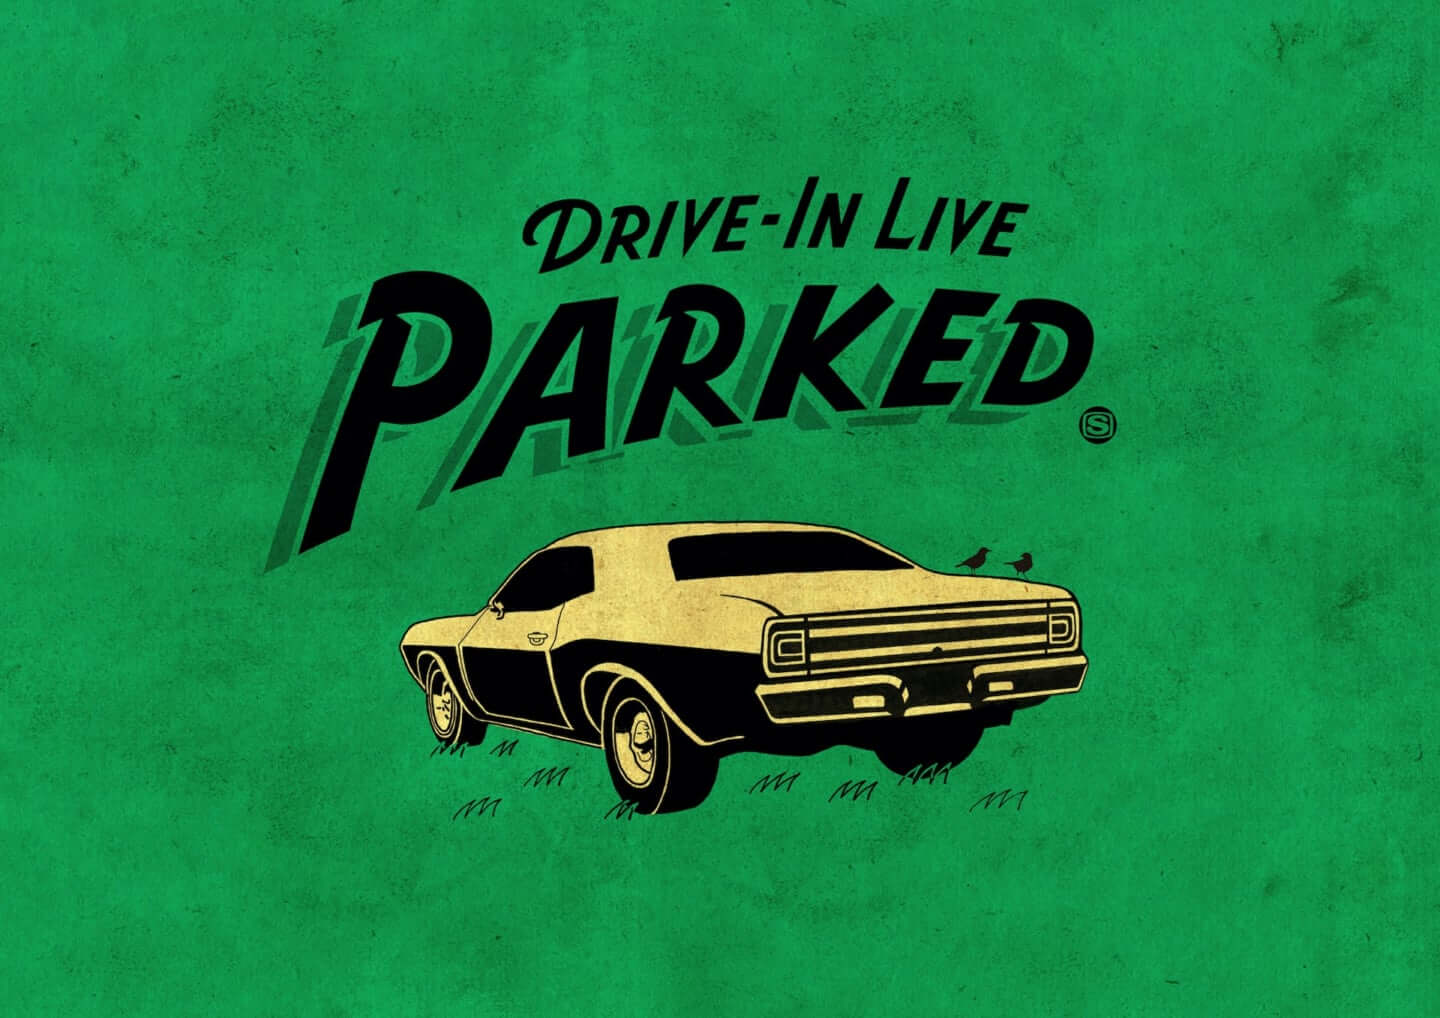 DRIVE-IN LIVE “PARKED”